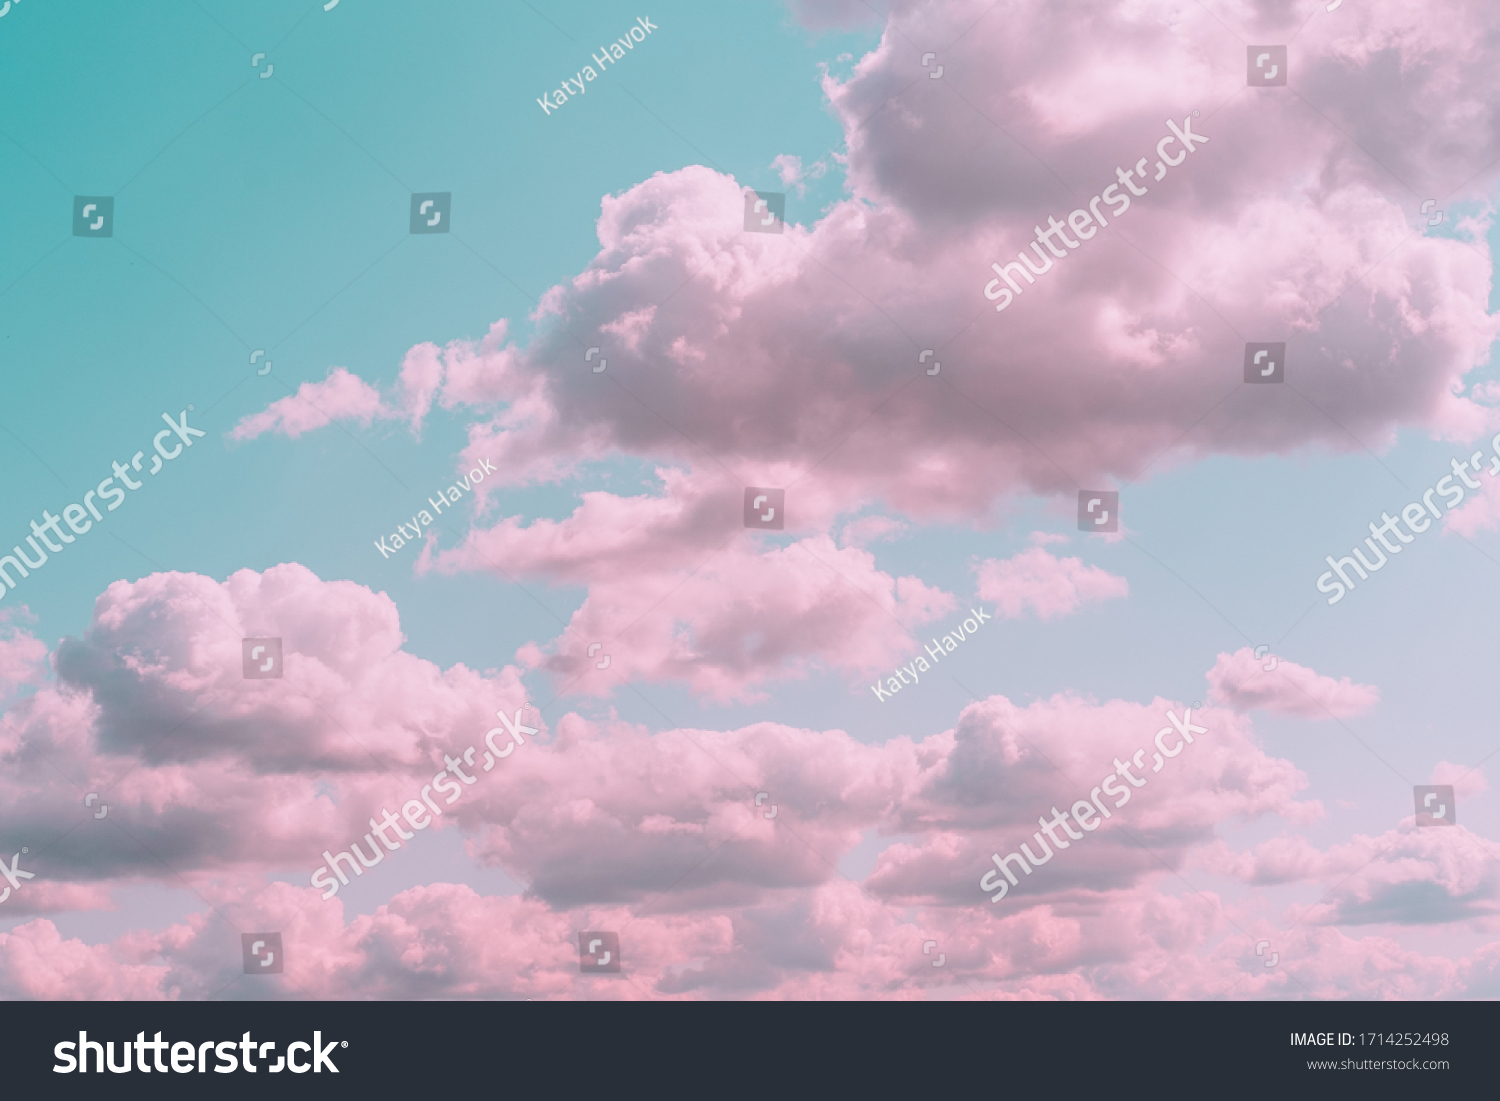 Aesthetic background with beautiful turquoise sky with pink clouds and circle light frame. Minimal creative concept of angel paradise #1714252498